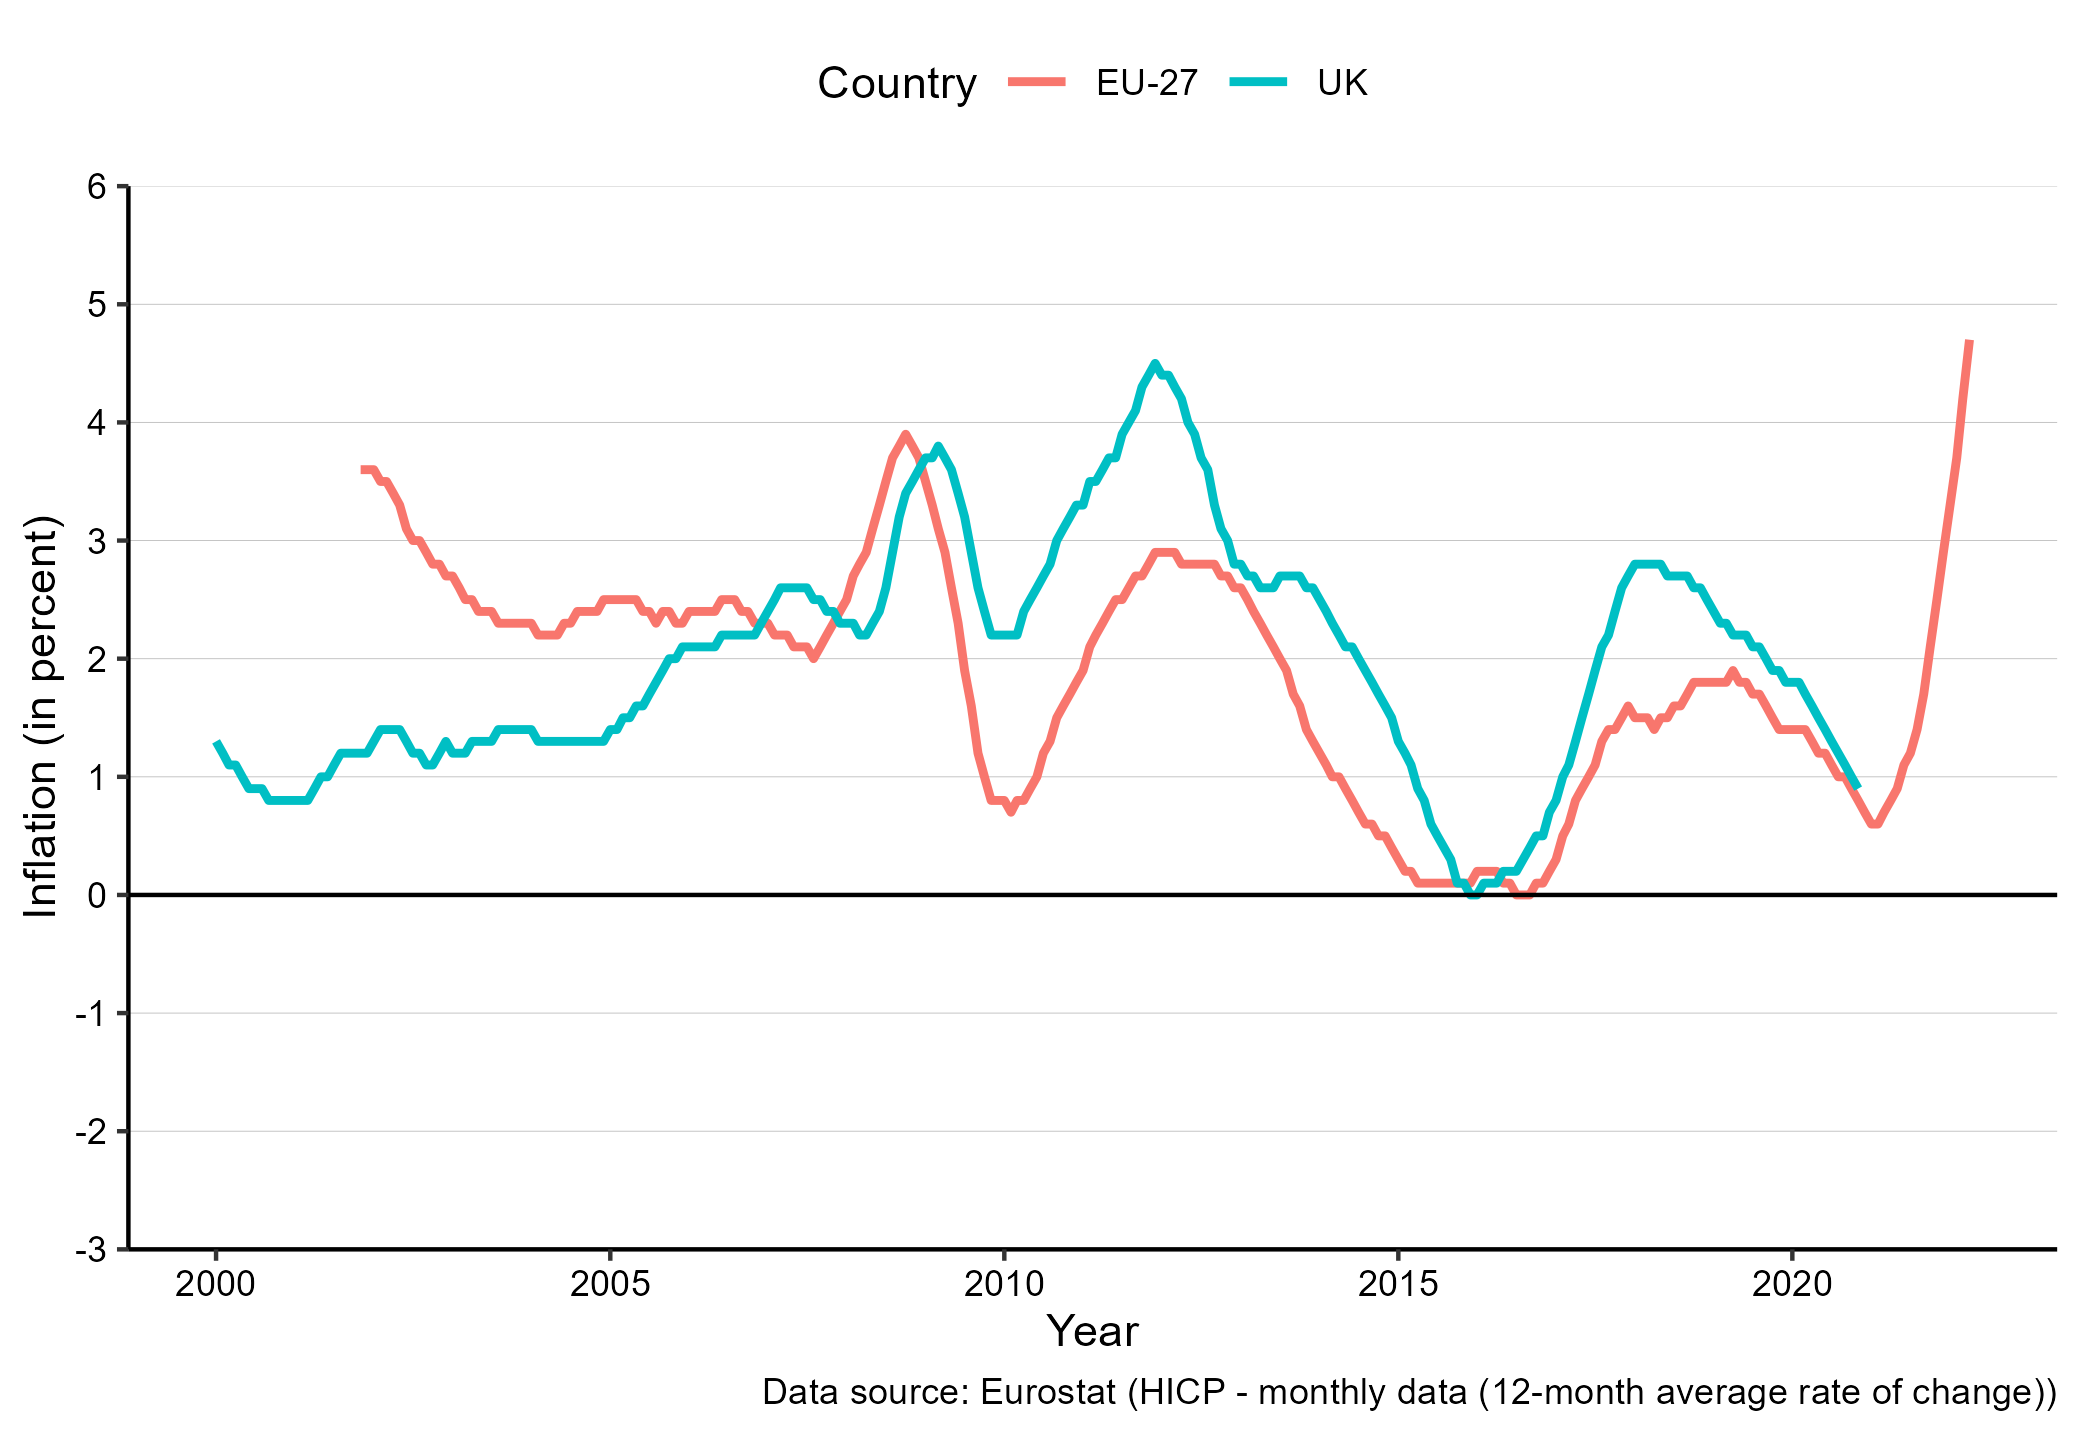 Consumer Price Inflation for the EURO countries and the UK. {Source: Eurostat. Notes: The inflation relates to 12 month changes.}